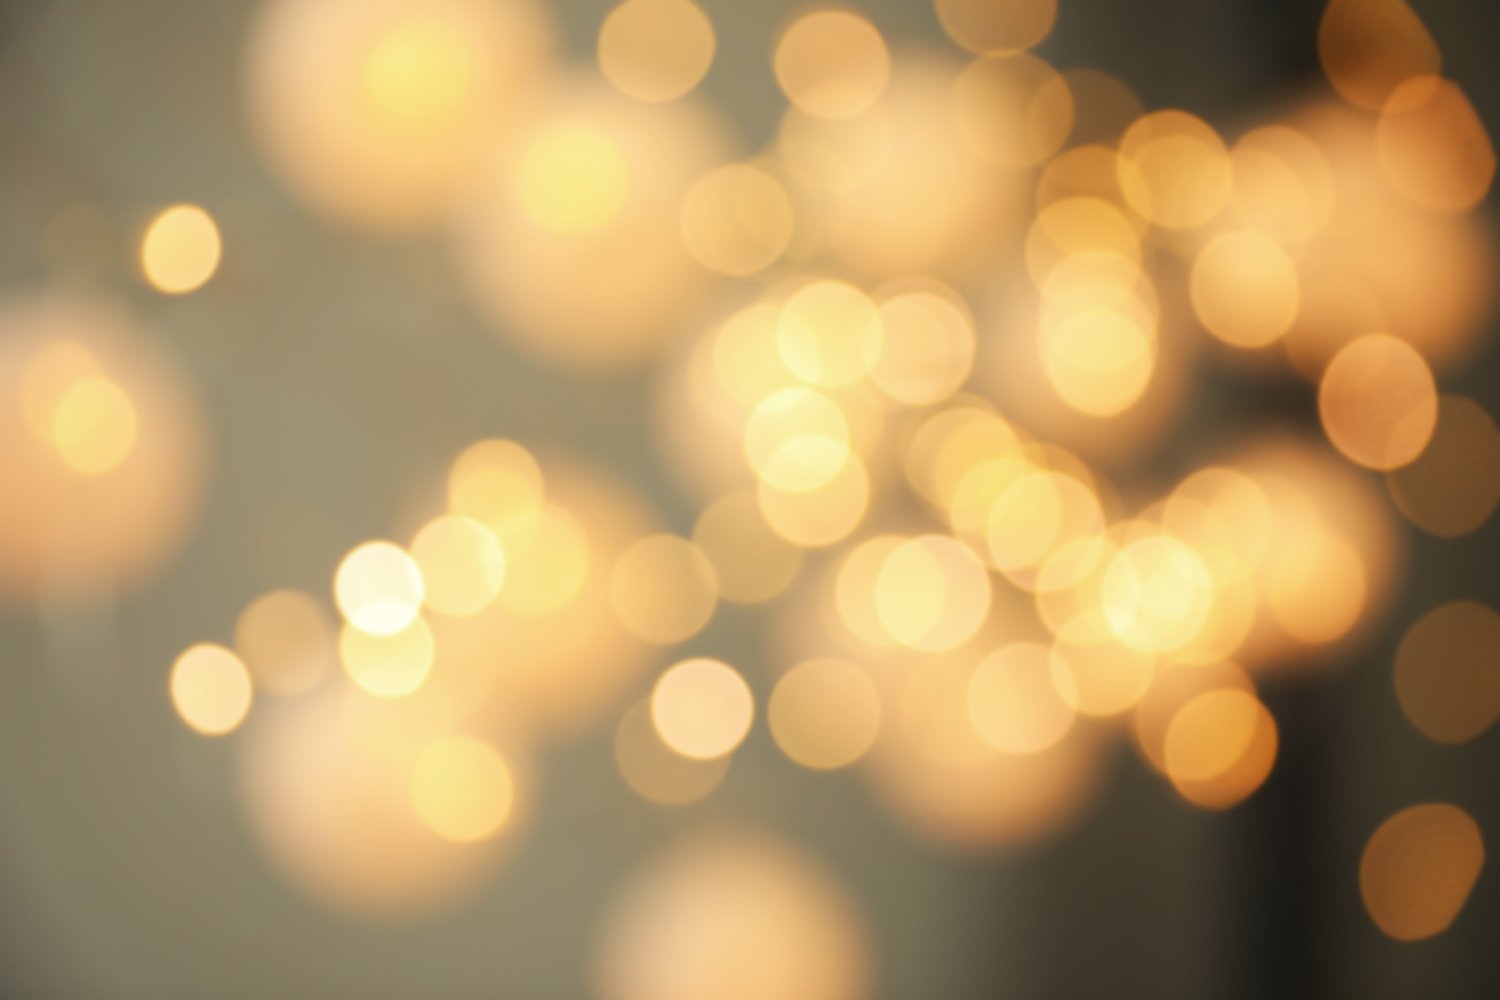 Photo of blurred view of shiny gold lights. Bokeh effect